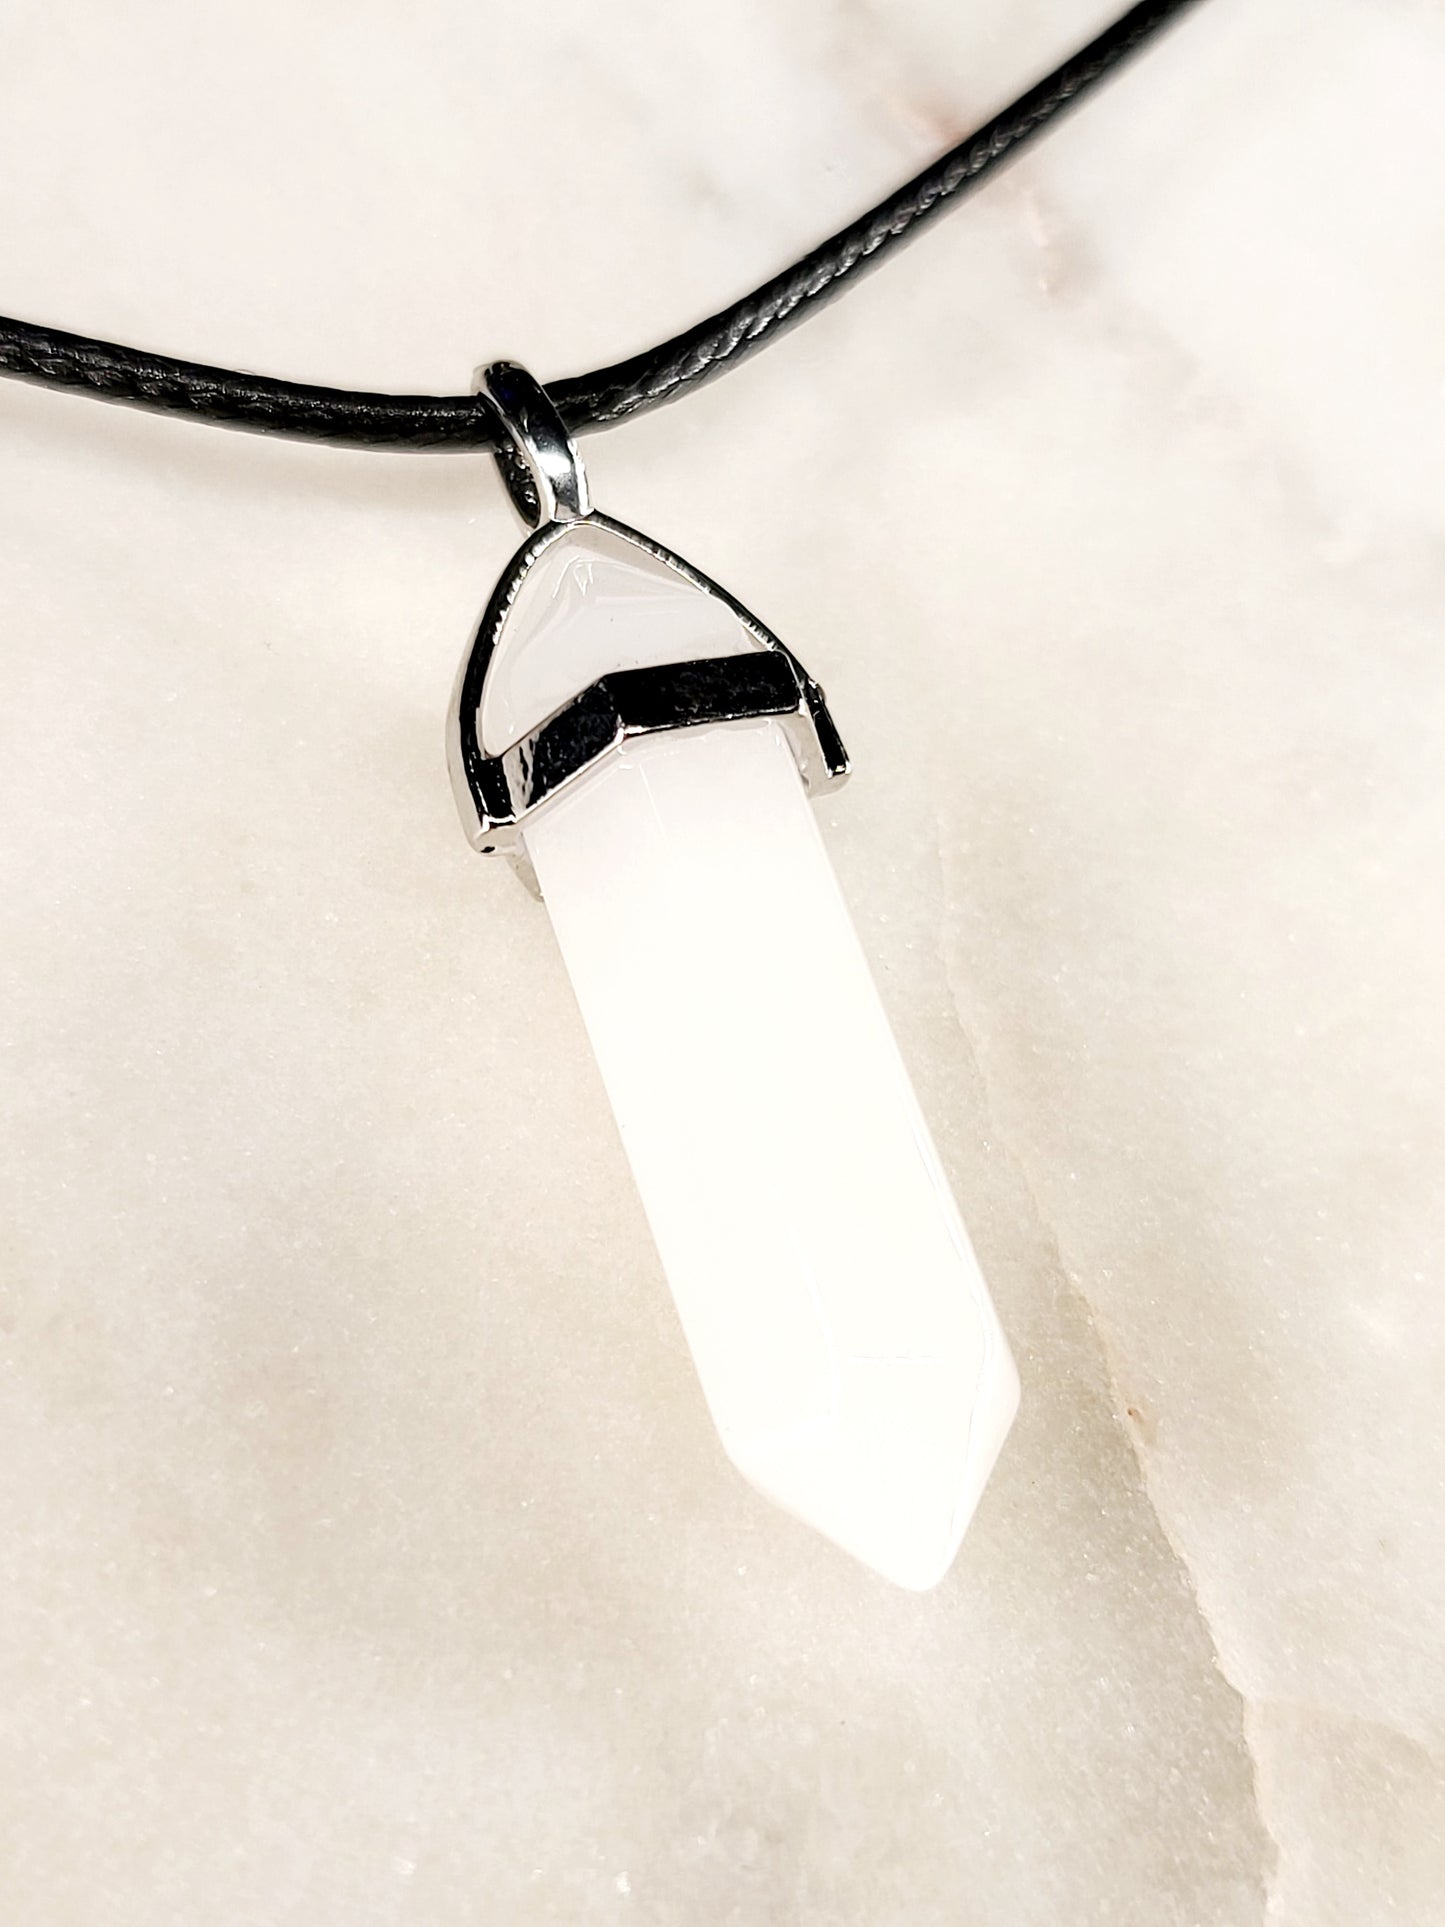 Opalite Crystal Point Necklace